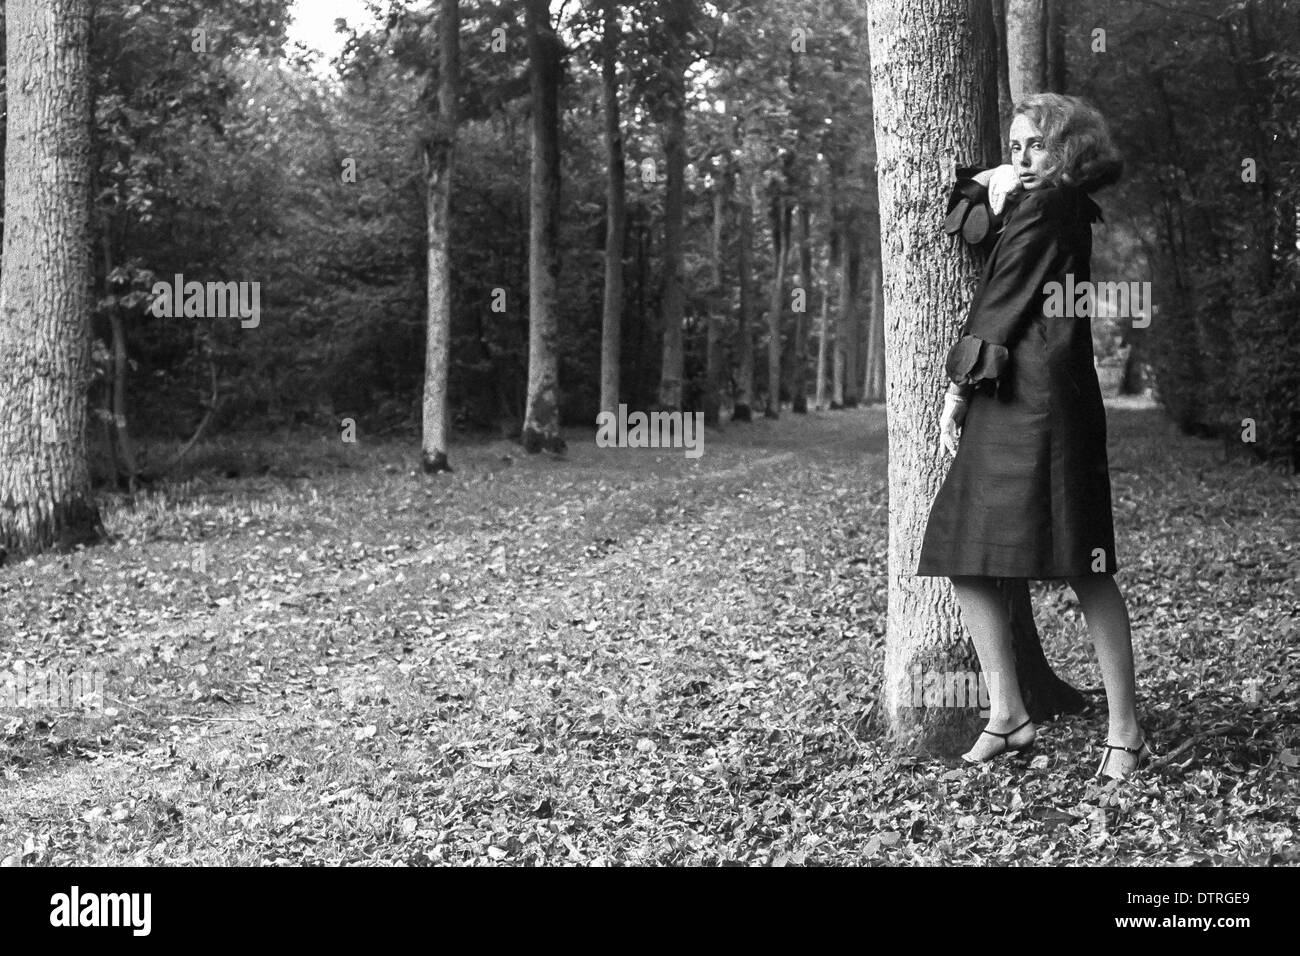 Sixties fashion model with black coat posing in forest Stock Photo